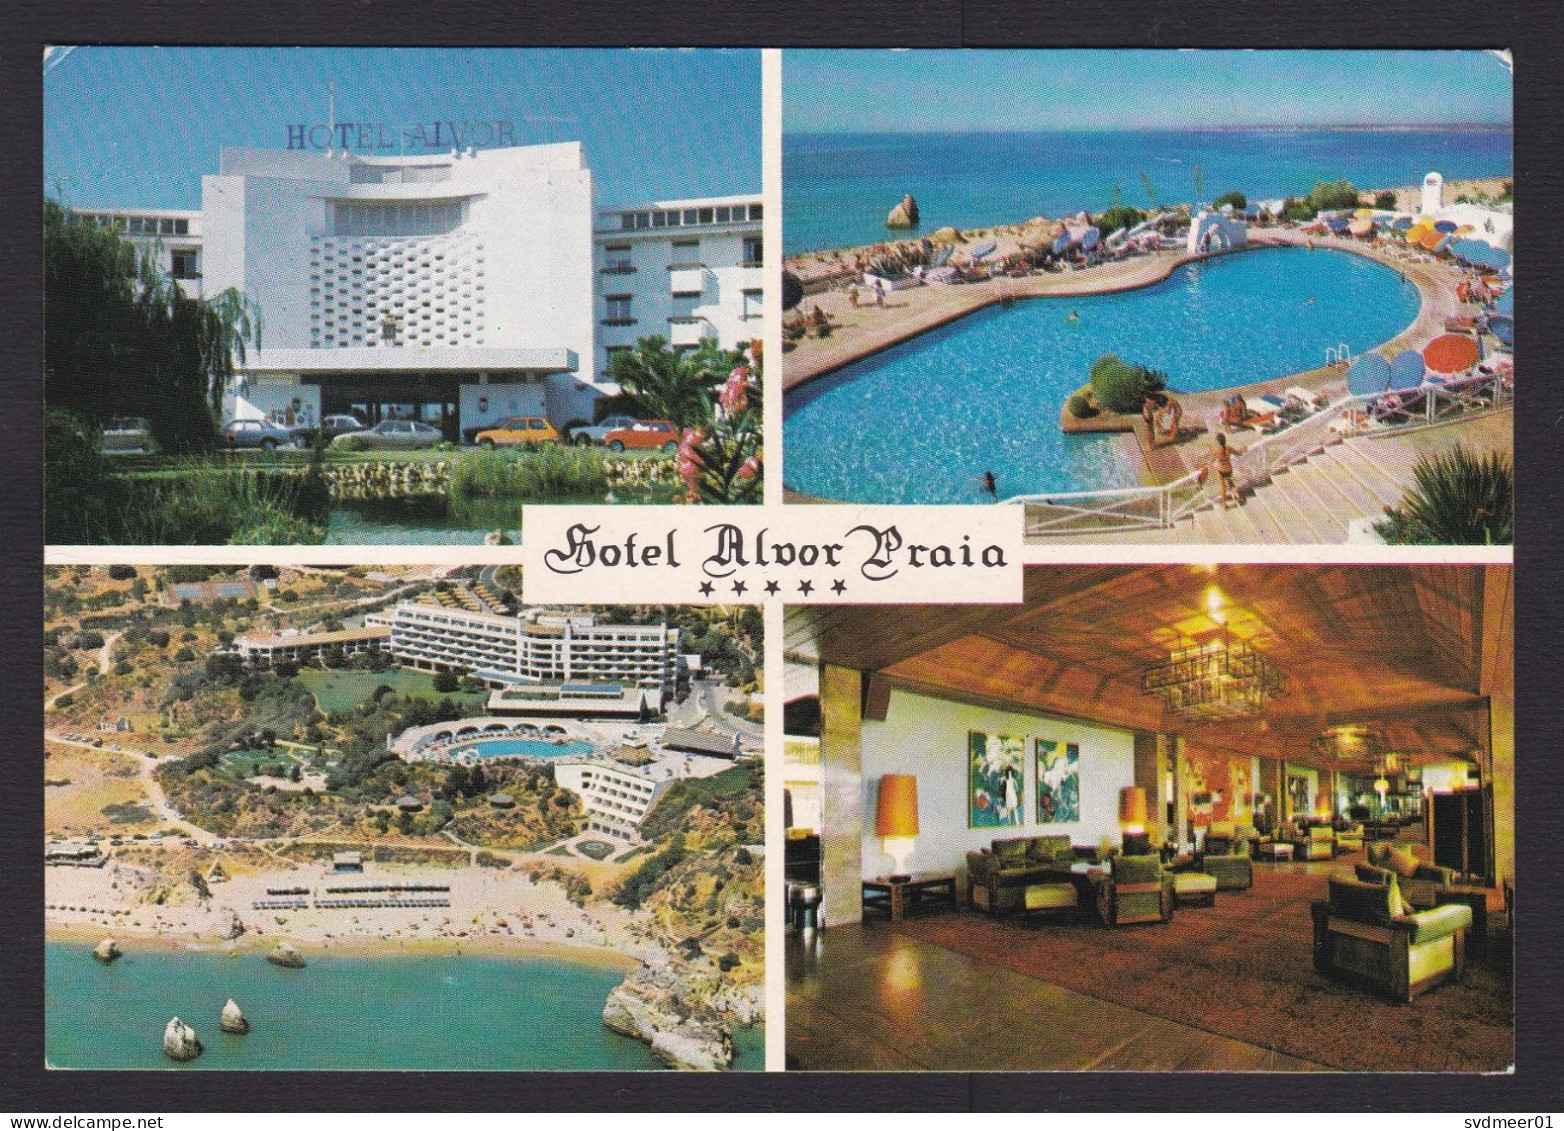 Portugal: Picture Postcard To Germany, 1980s, 2 Stamps, Construction, Card: Hotel Alvor Praia, Portimao (traces Of Use) - Covers & Documents